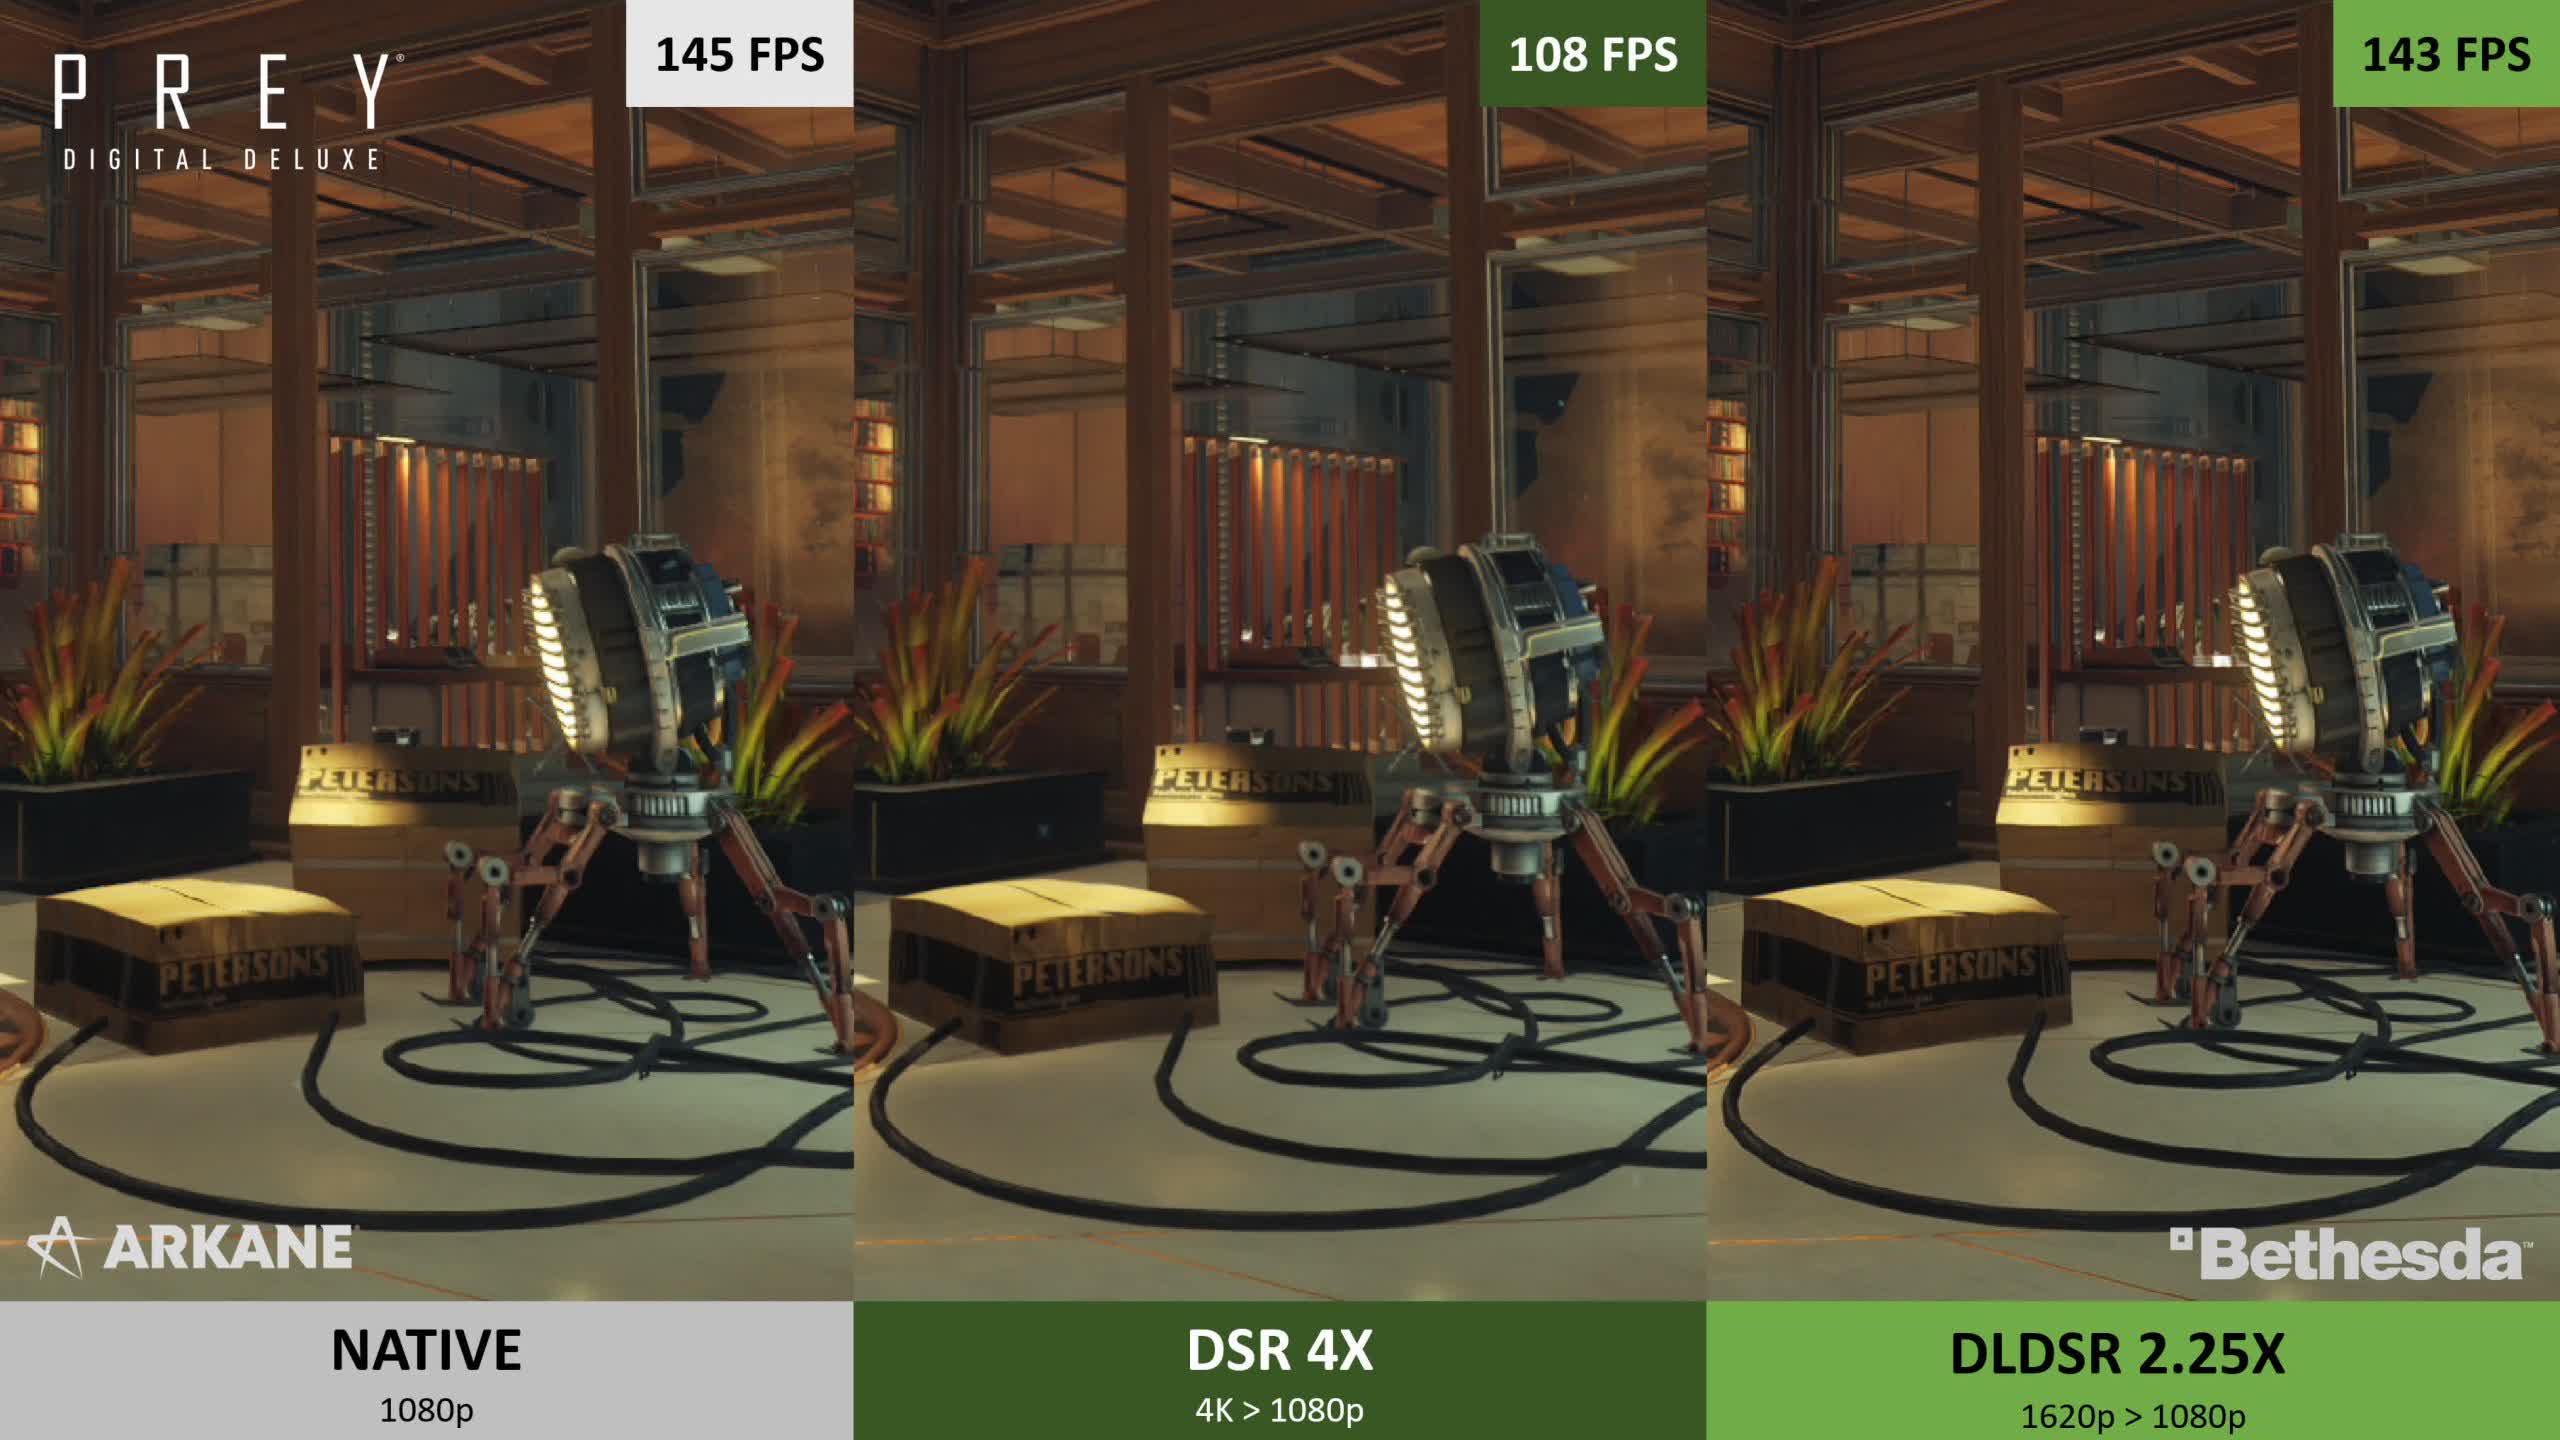 Latest Nvidia drivers reveal AI-powered downscaling feature called DLDSR thumbnail